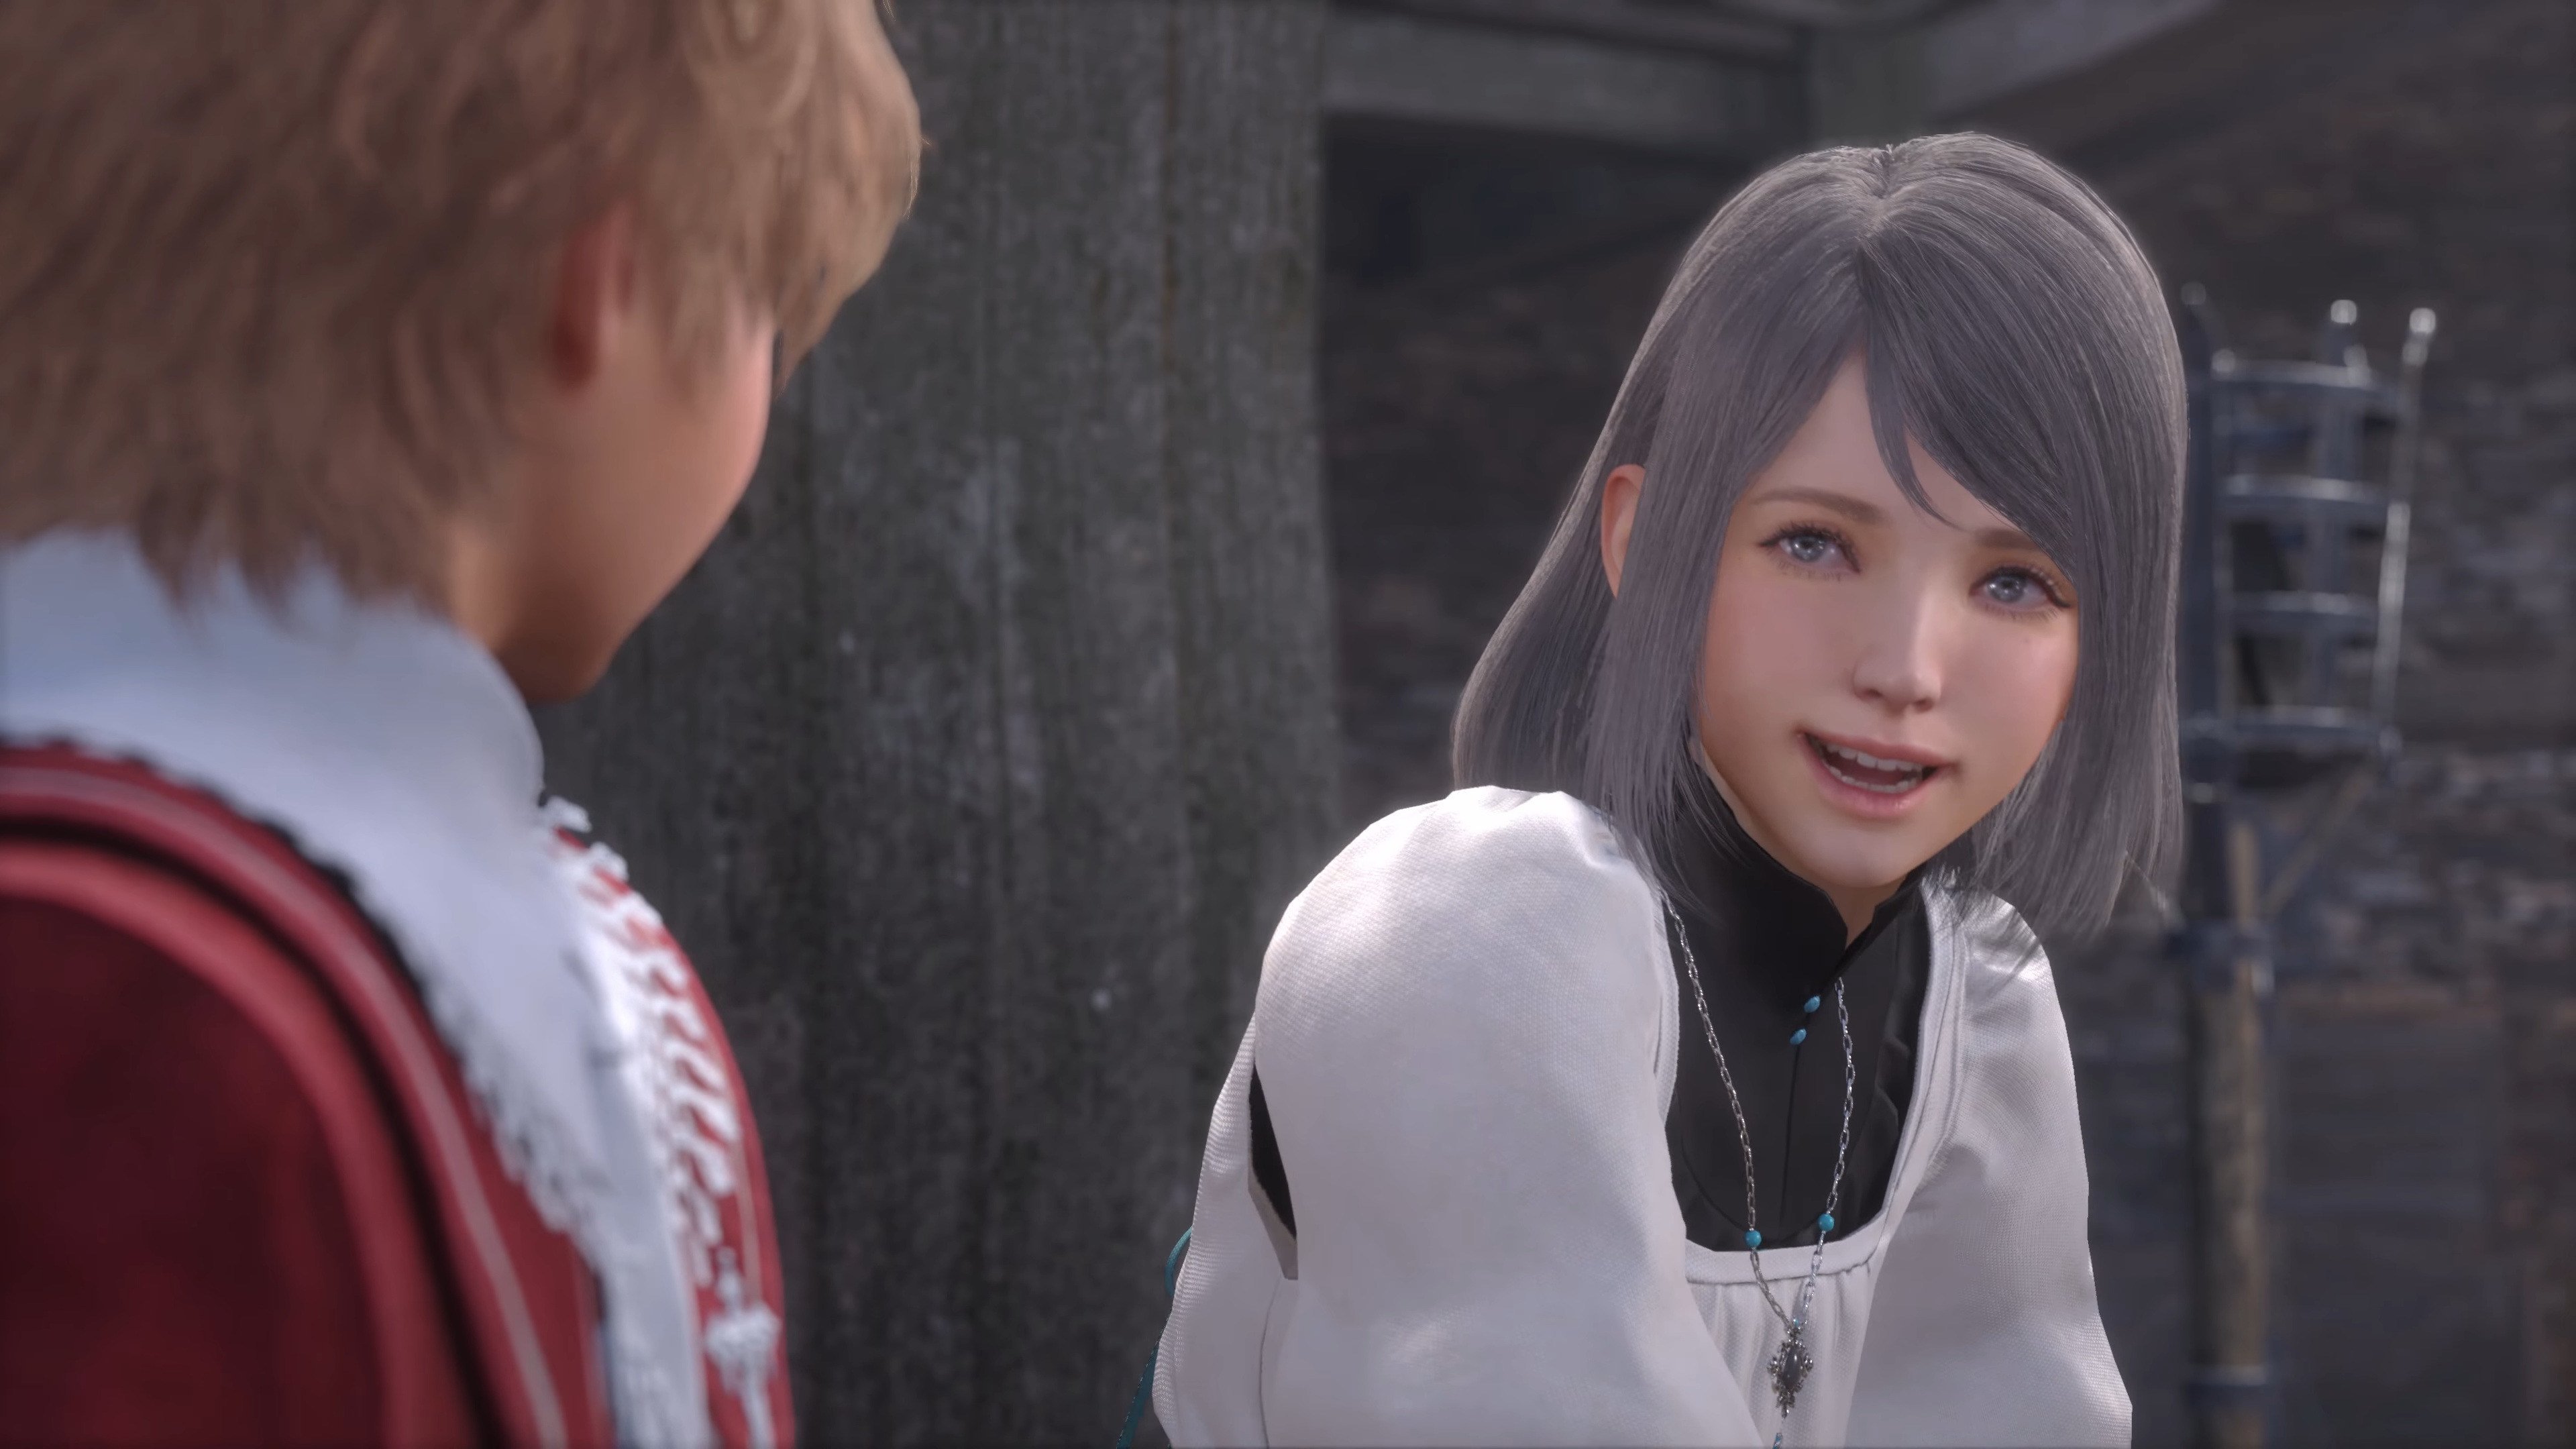 Final Fantasy 16 character list, Factions and families explained